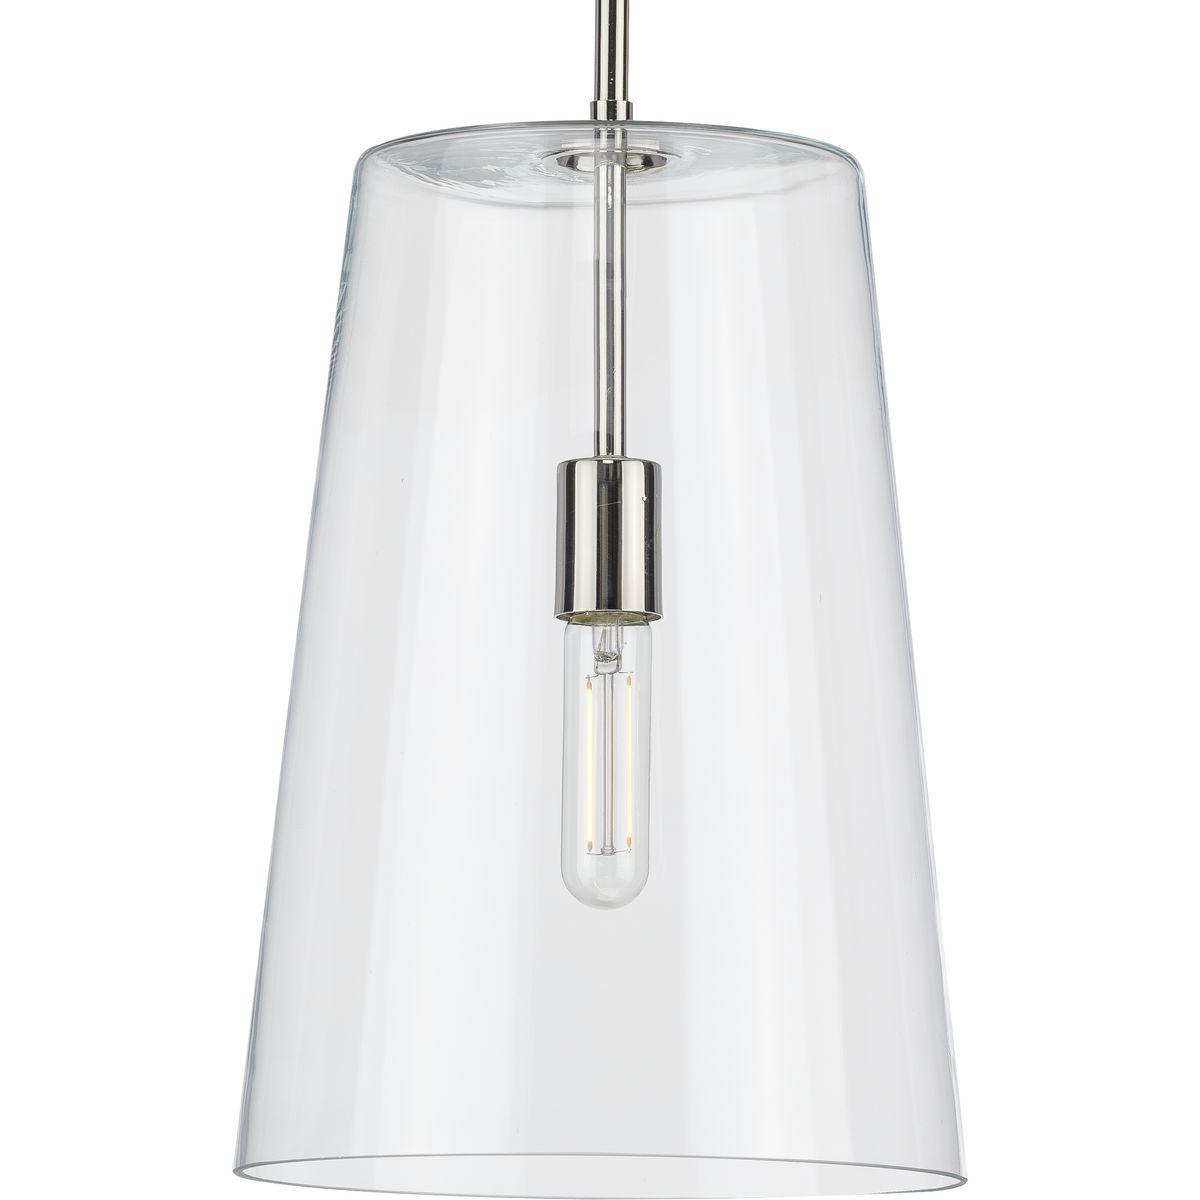 Hubbell P500242-104 Who says you have to sacrifice forms for function? This versatile pendant features a simple, clear glass shade that embraces minimalist modernity and functional task lighting. The glass shade rests at the end of a sleek polished nickel bar that attaches t